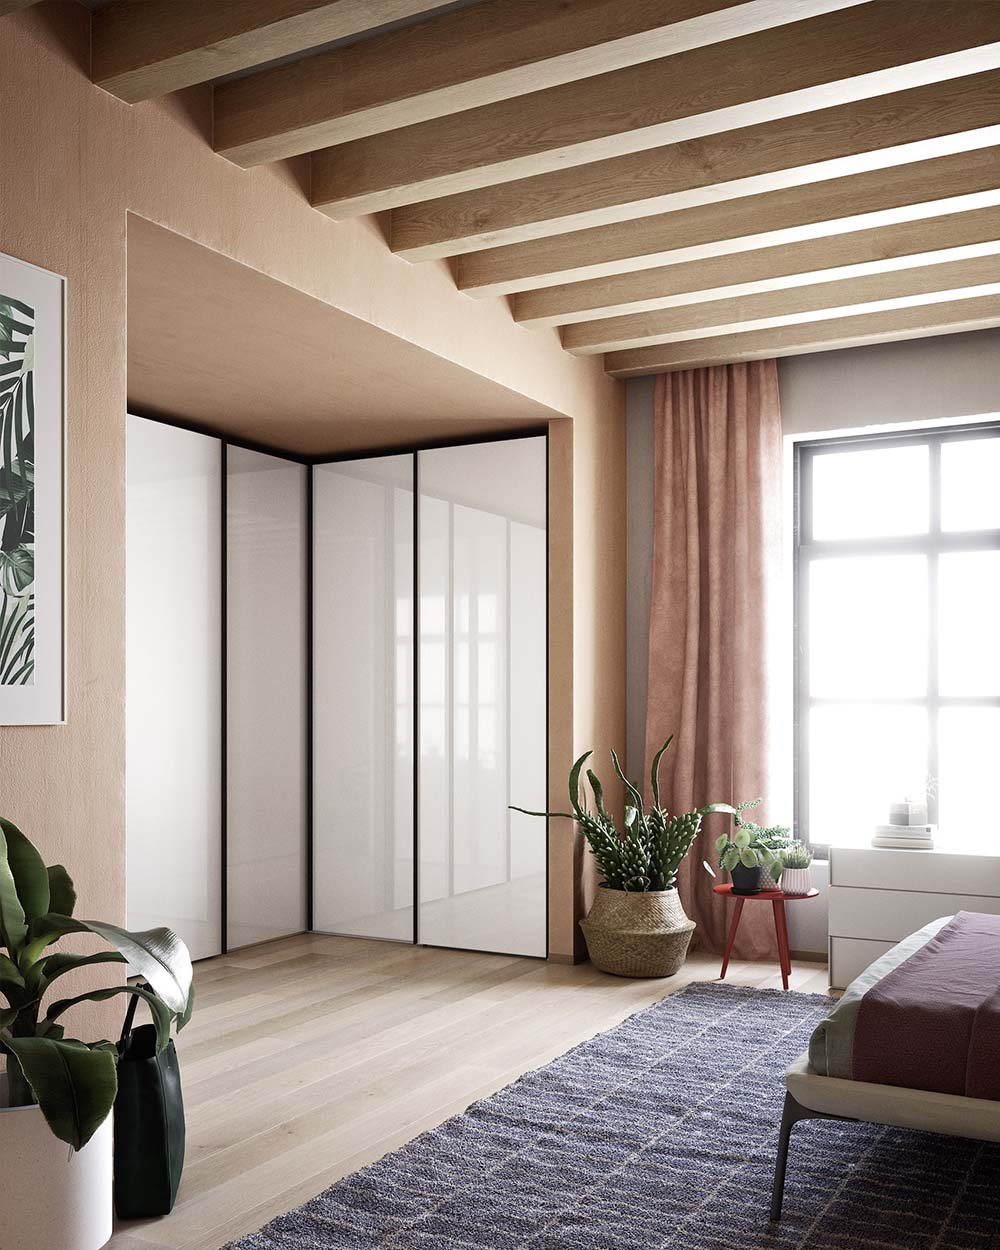 Luxury framed sliding wardrobe with extra-wide width. Available in mirror/mirrored finish or matt lacquer. Produced in Italy, designed and installed by Krieder.